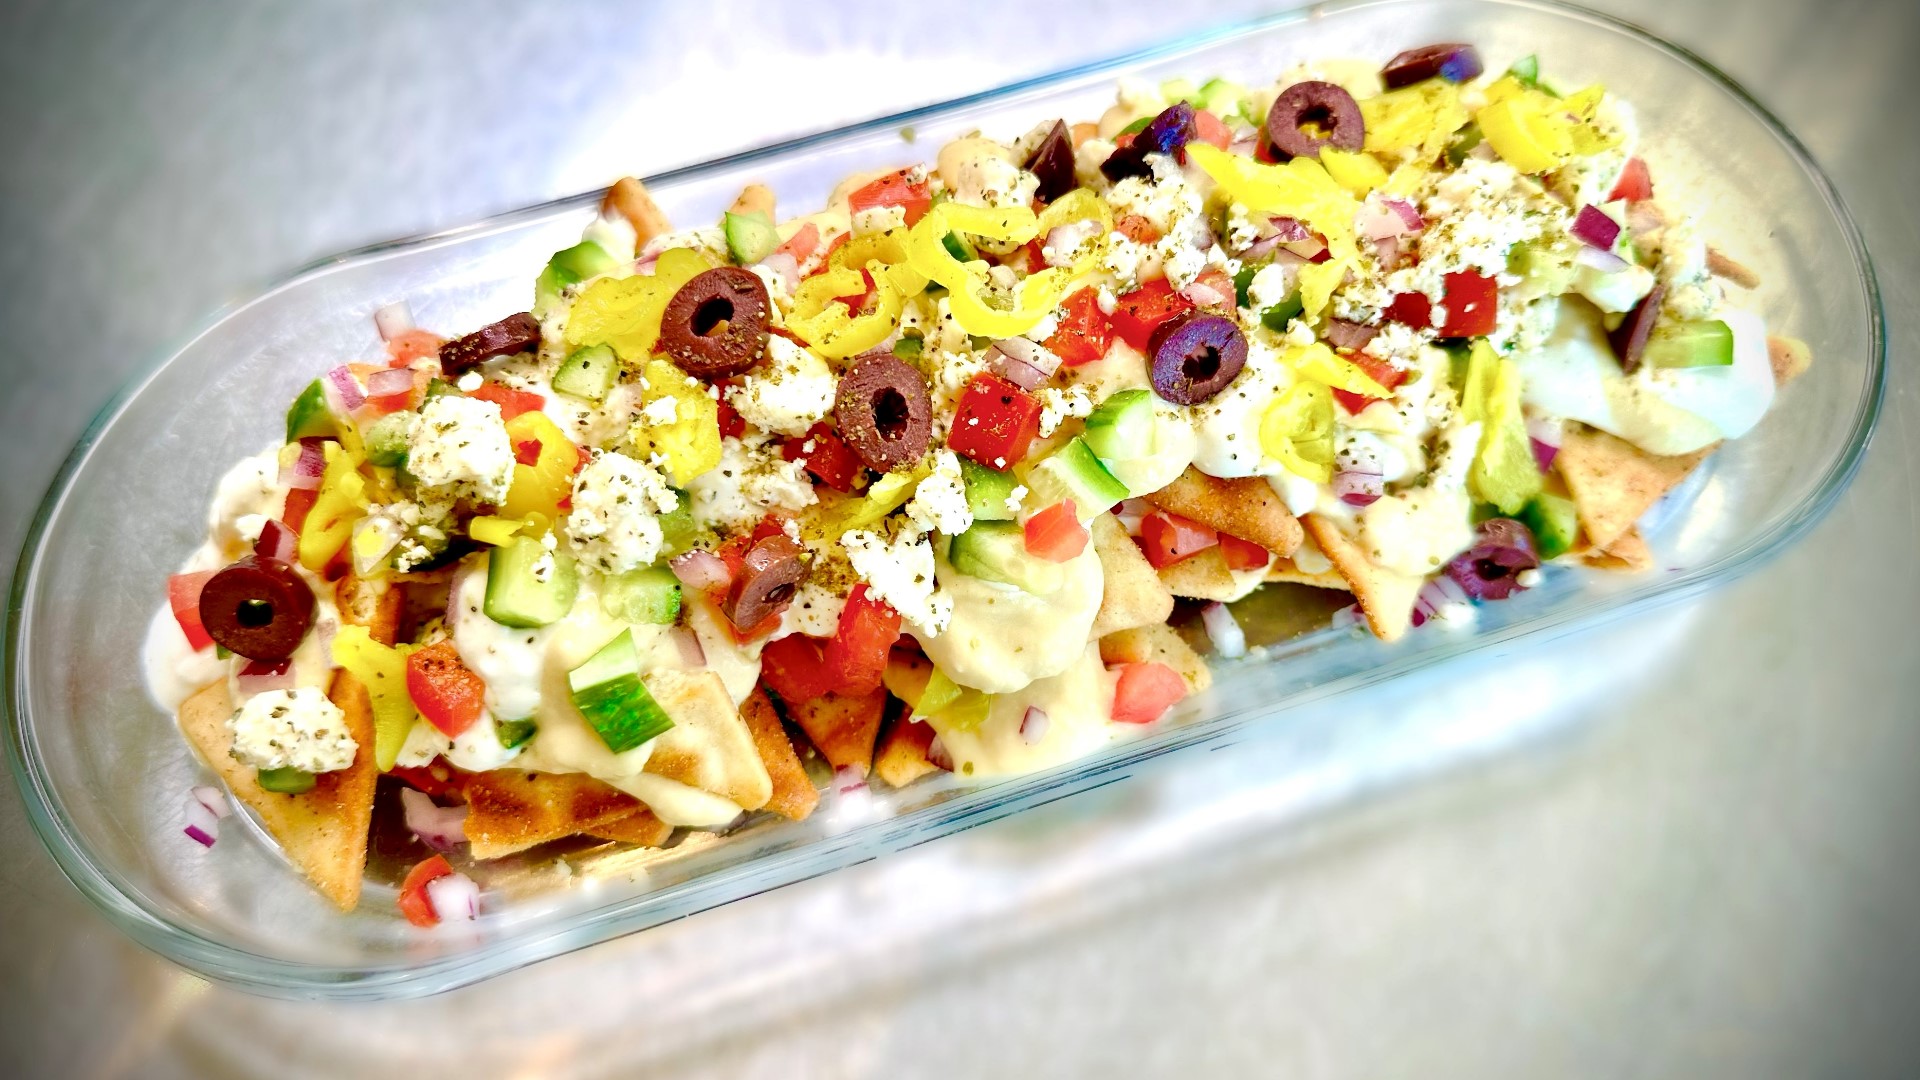 These greek nachos make a great party snack! Throw some pita chips, olives, cheese, veggies and hummus together for this tasty dish.